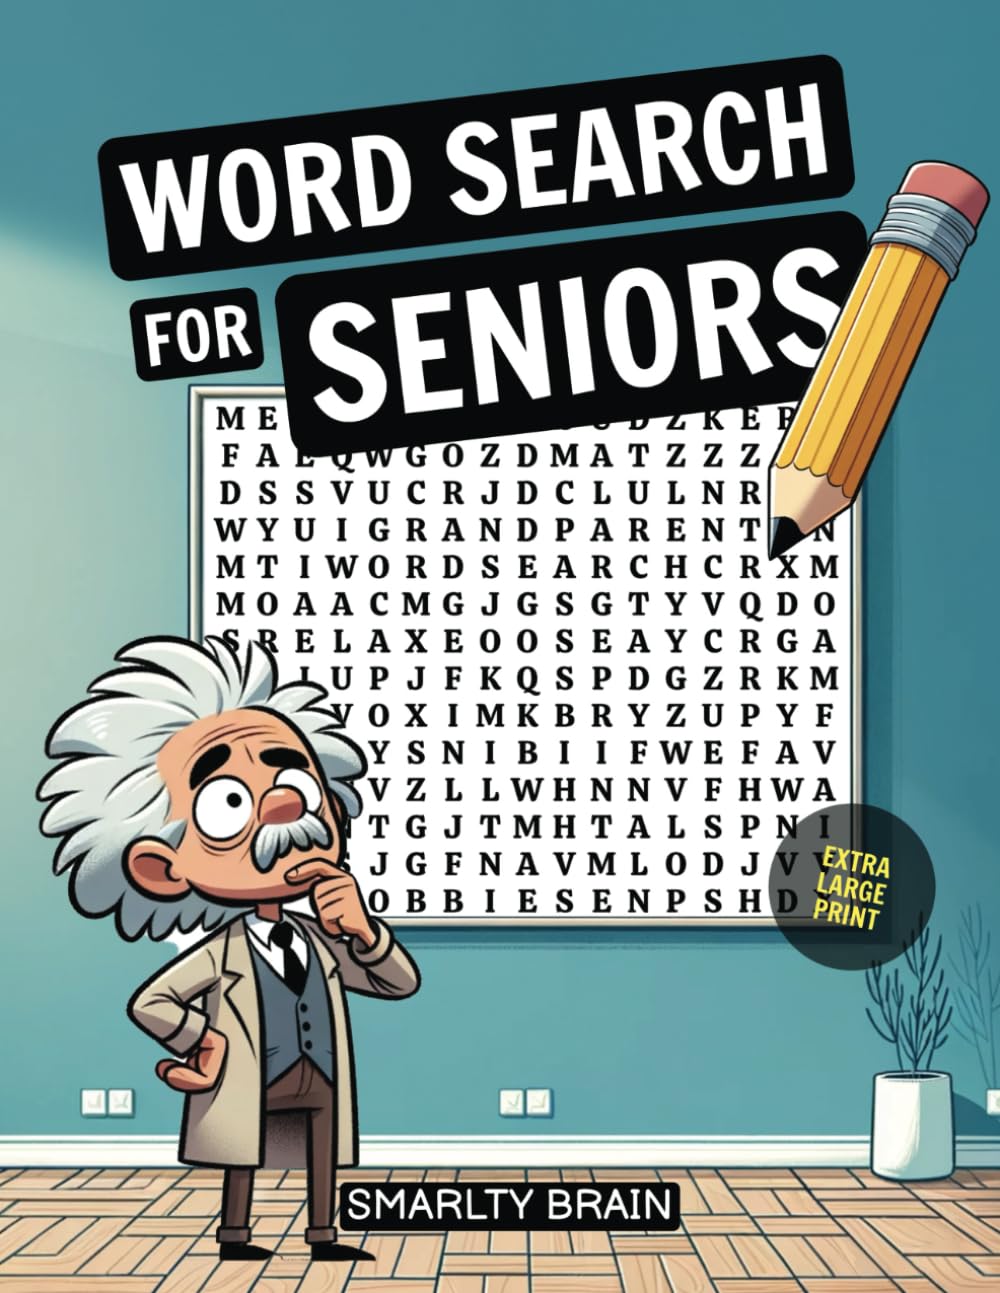 LARGE PRINT WORD SEARCH BOOKS FOR SENIORS - NO NEED FOR GLASSES: JUMBO GAMES PUZZLE - EASY TO READ - THERAPEUTIC GAME FOR MEMORY AND CONCENTRATION FOR OLDER ADULTS, ELDERLY, OR CHILDREN